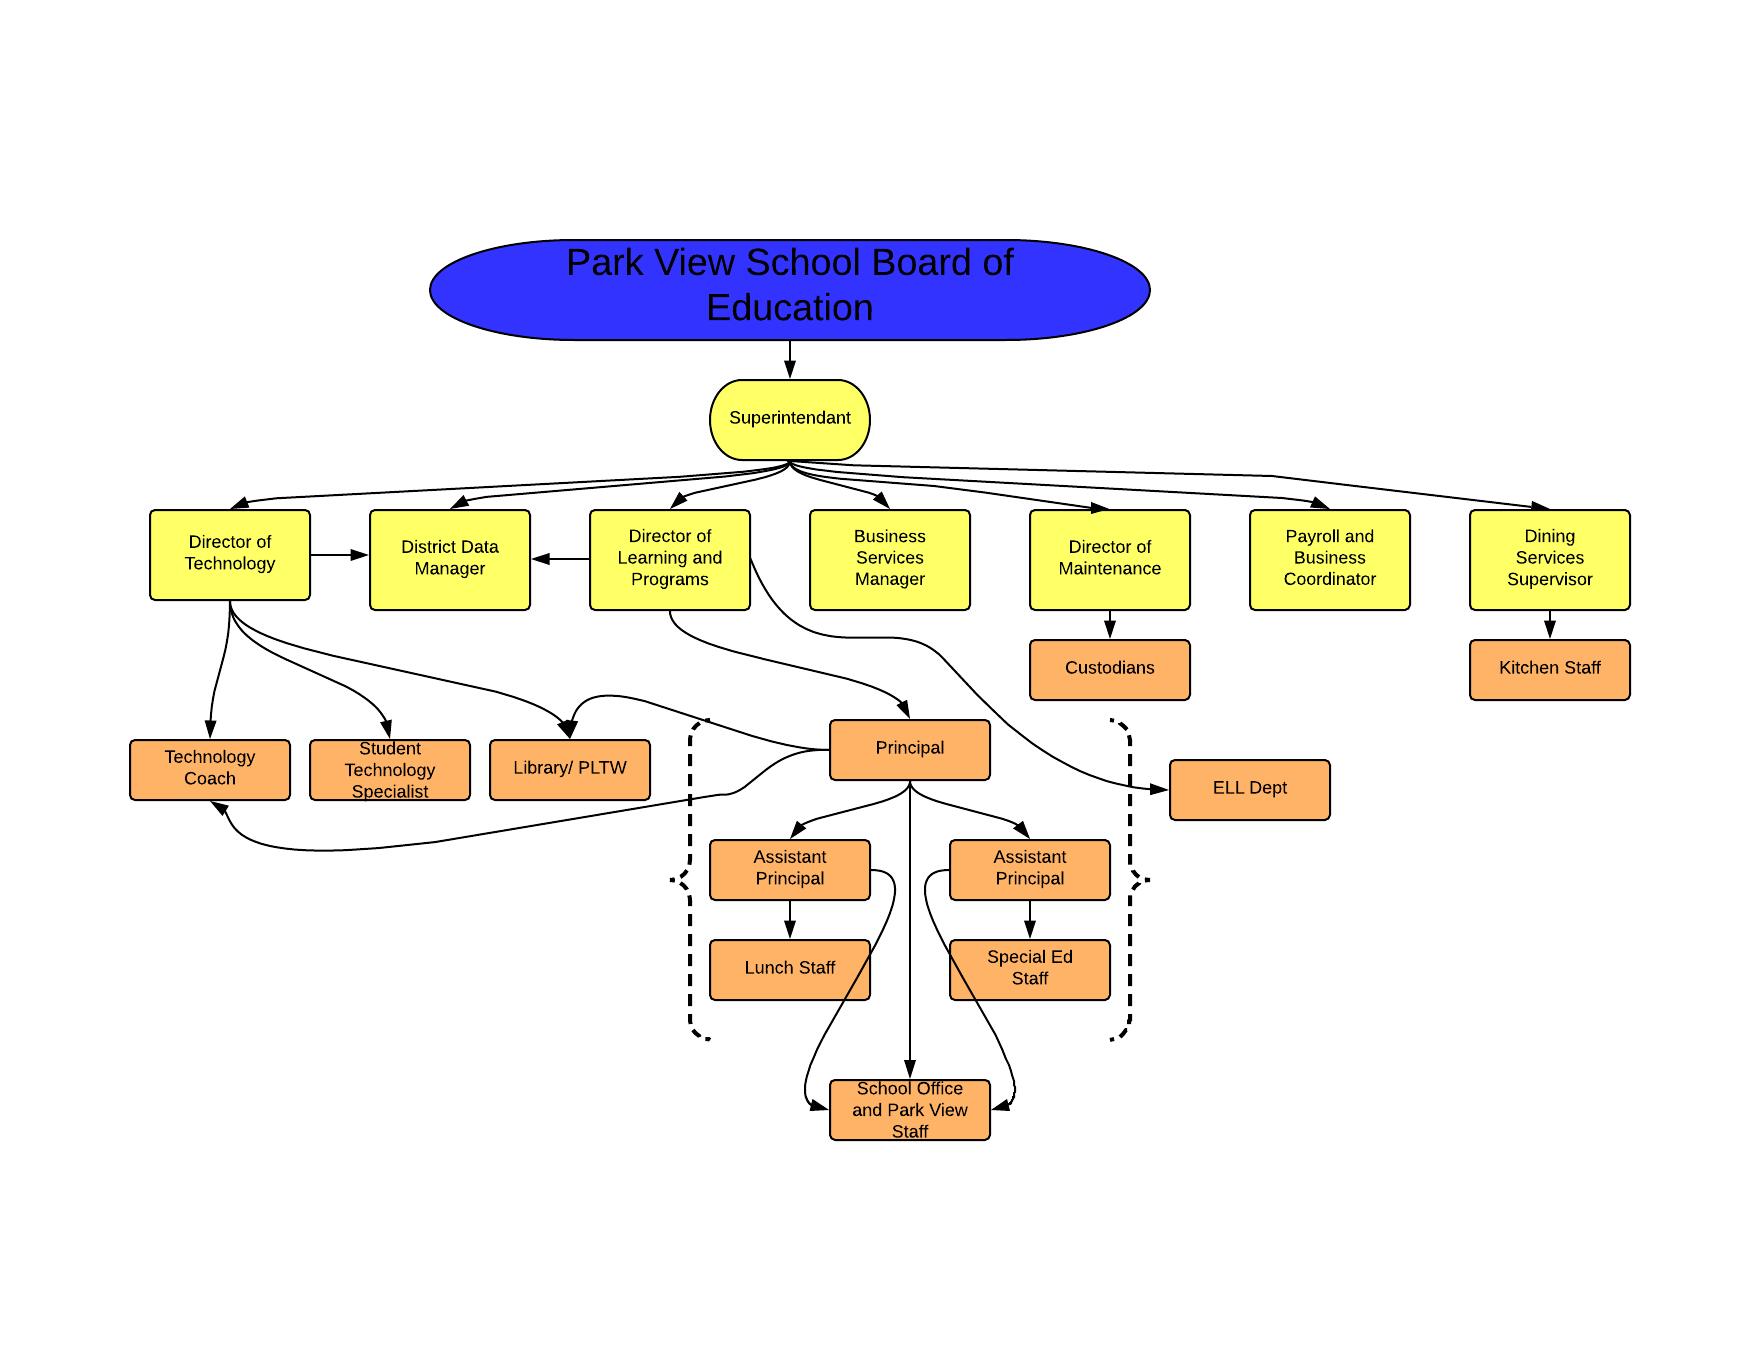 Park View School Board of Education Org Chart